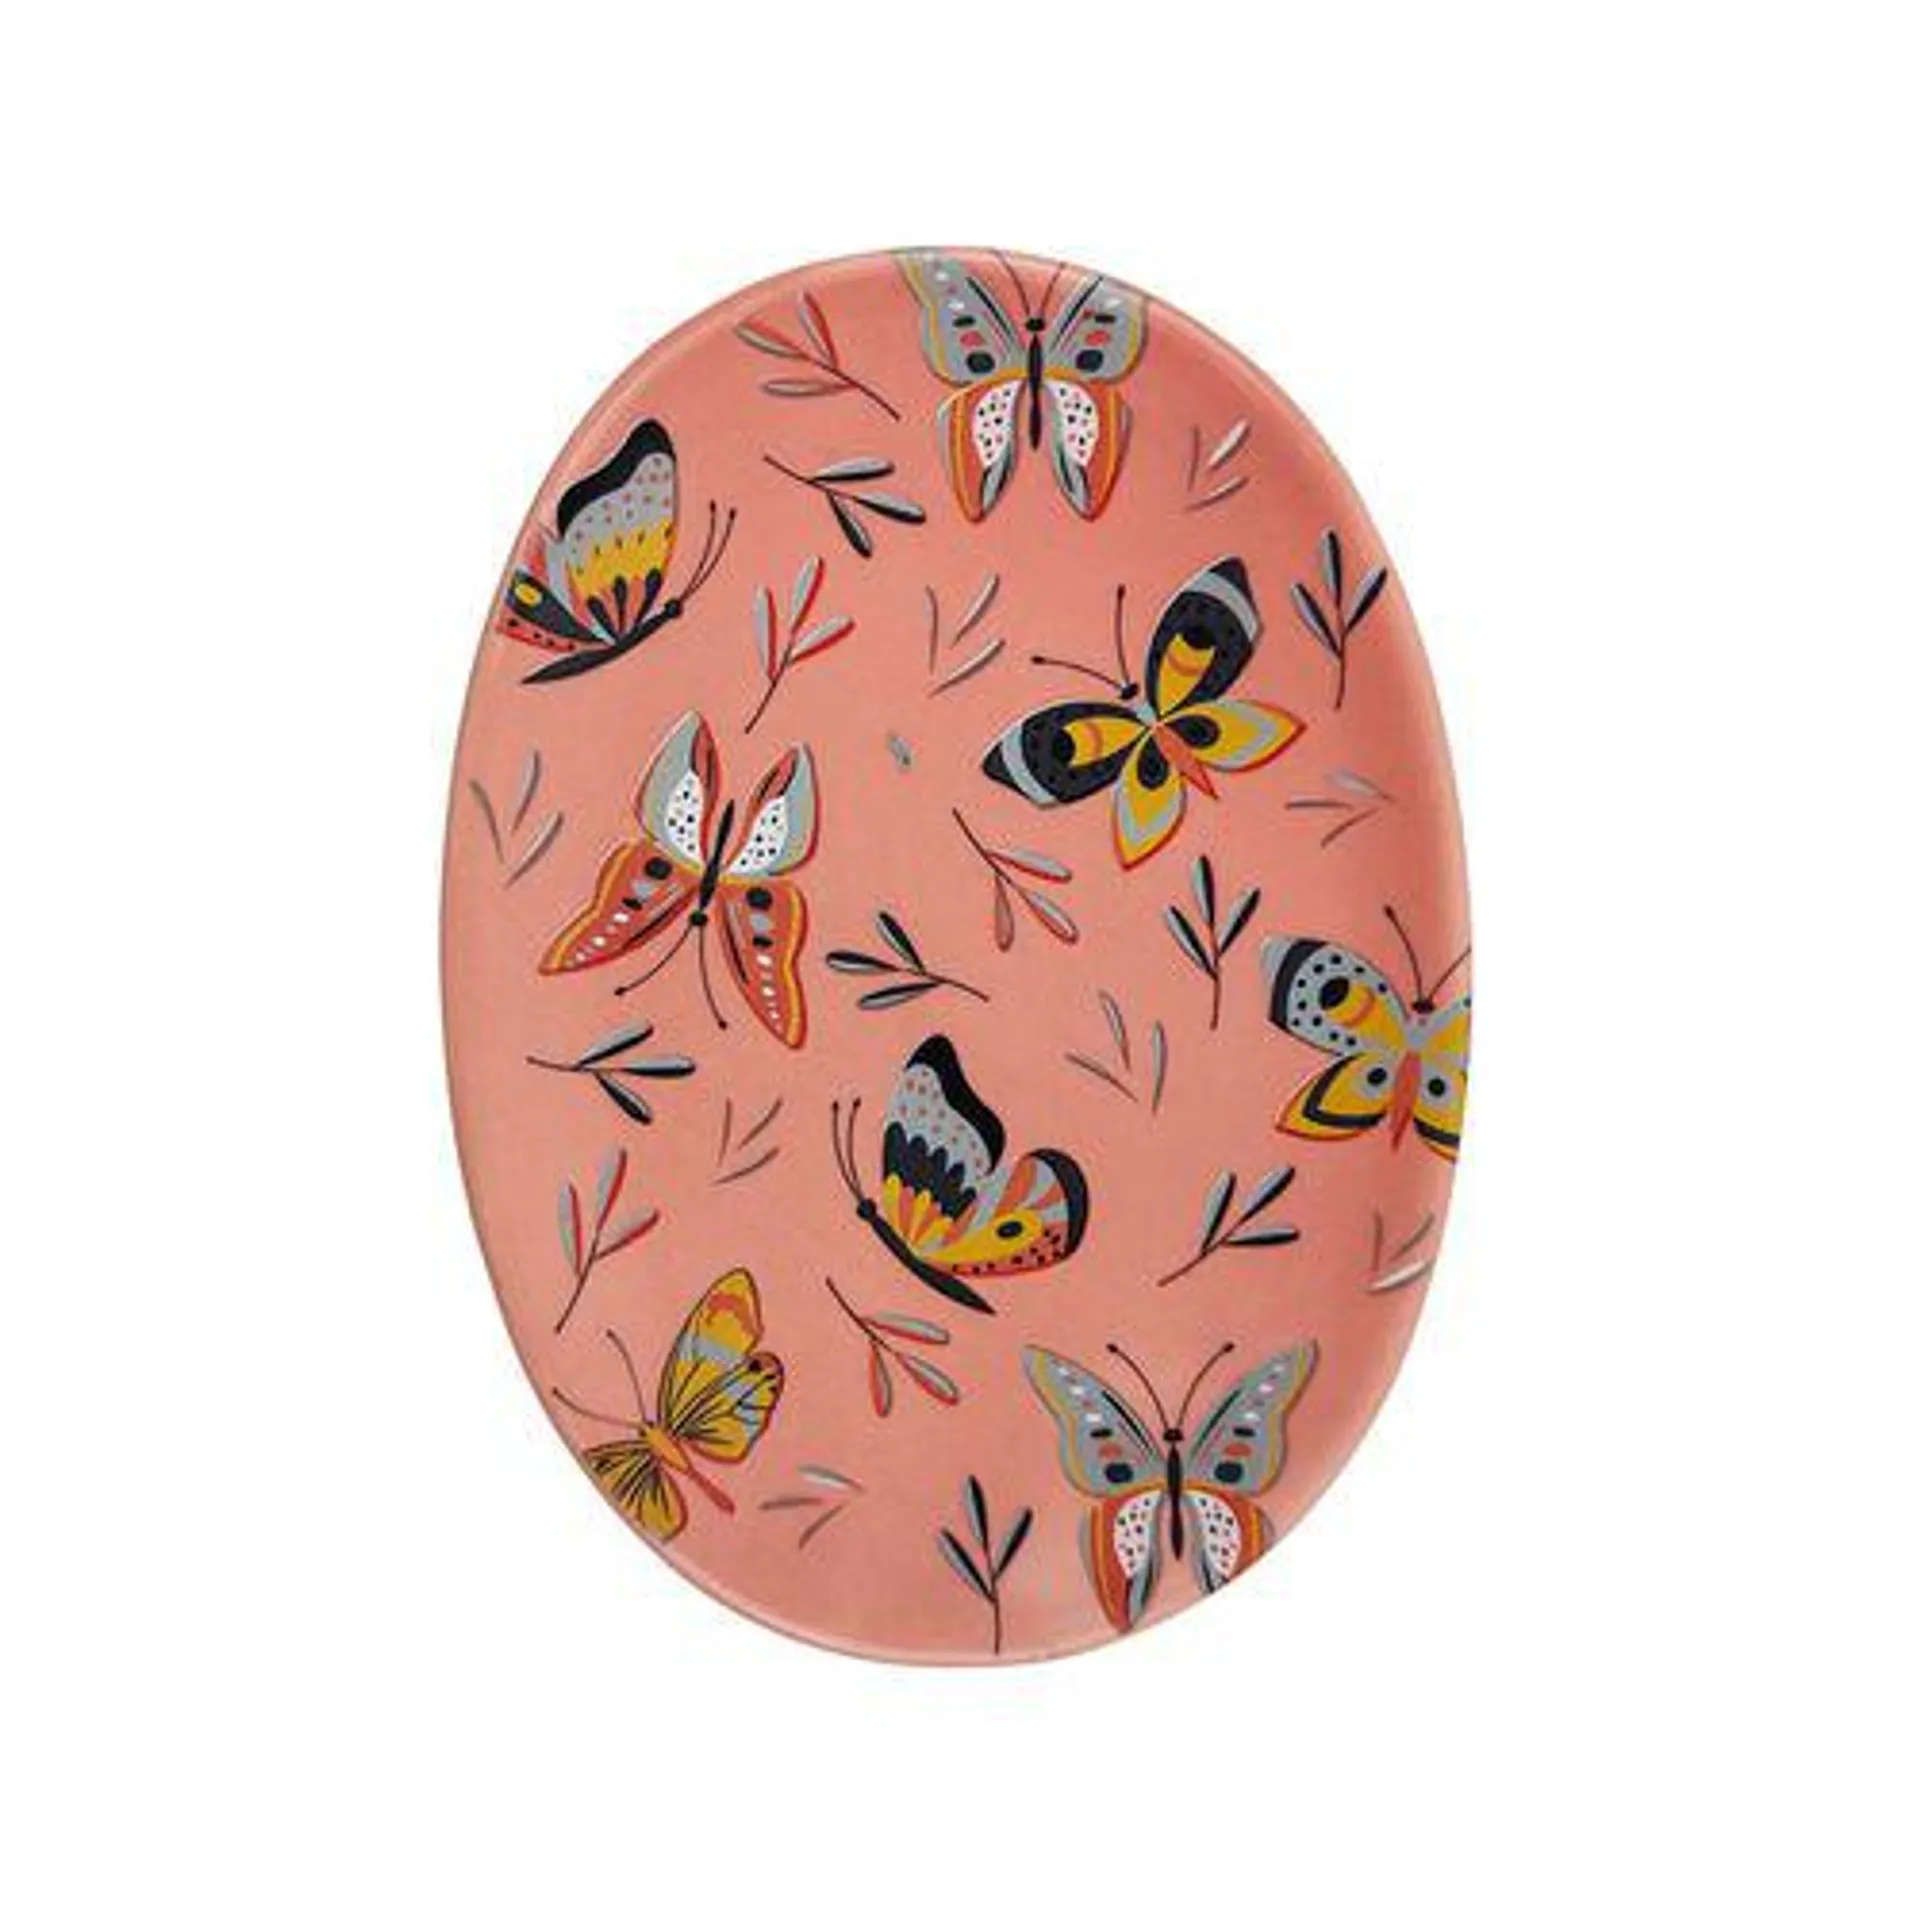 Urban Butterfly 12cm Ceramic Dish Home Decor Plate - Pink